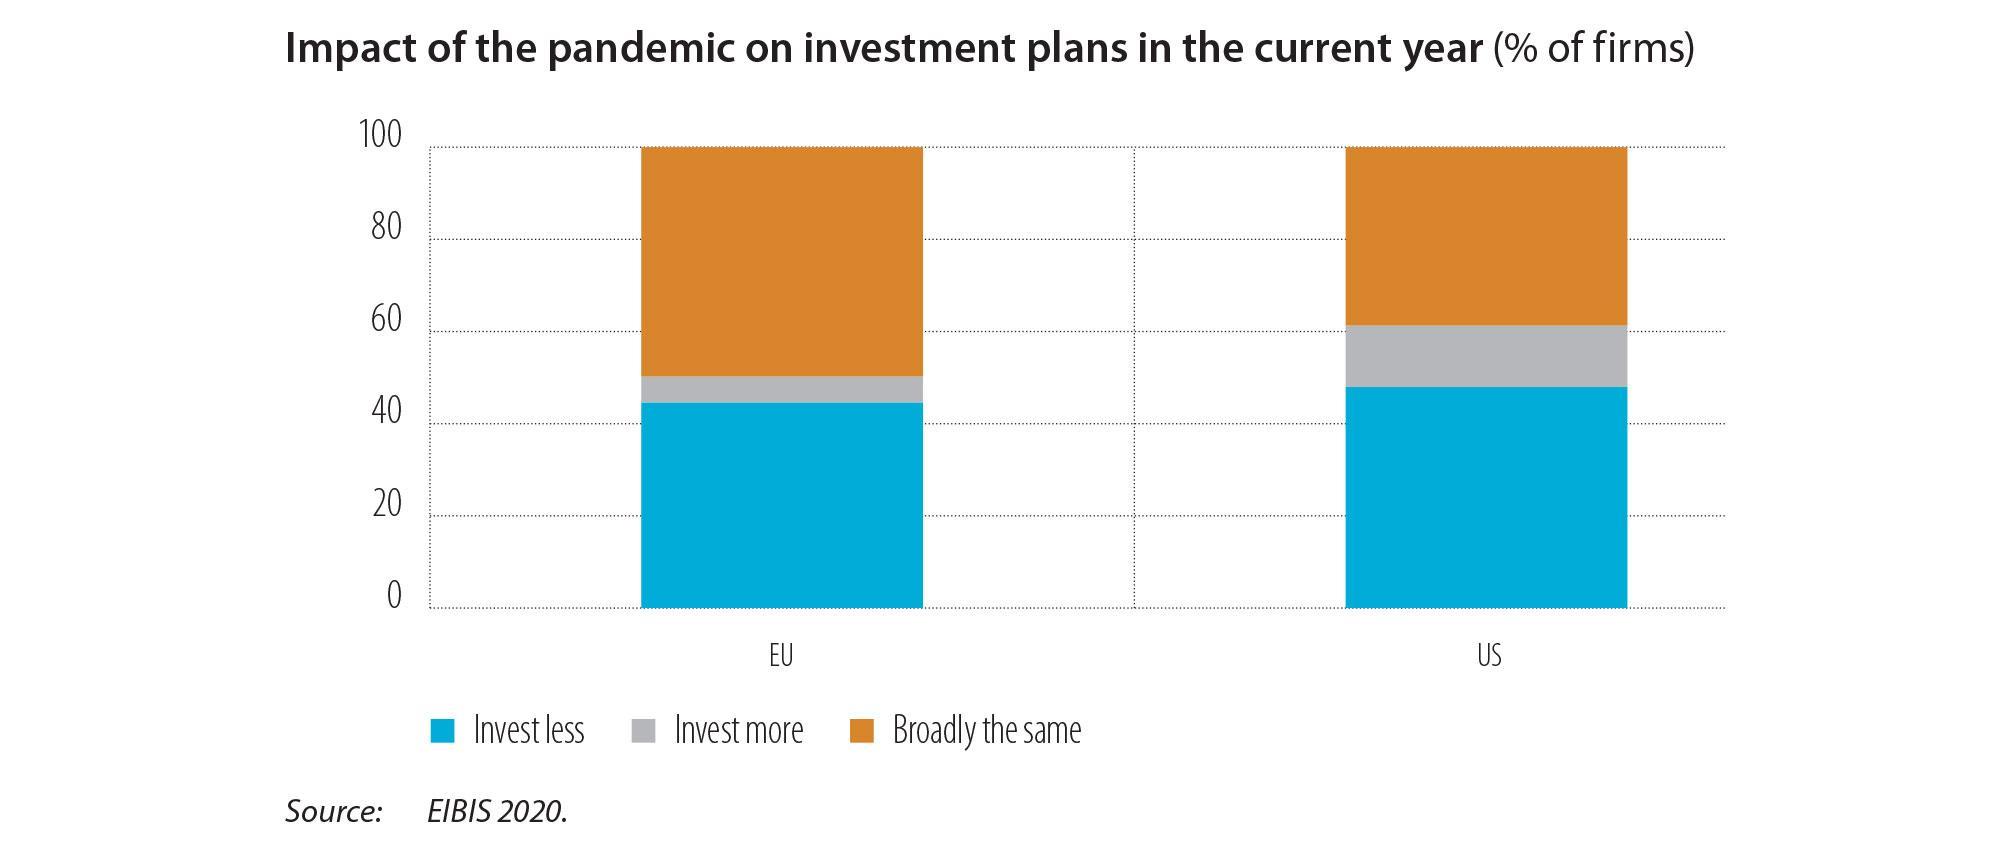 Impact of the pandemic on investment plans in the current year (% of firms)